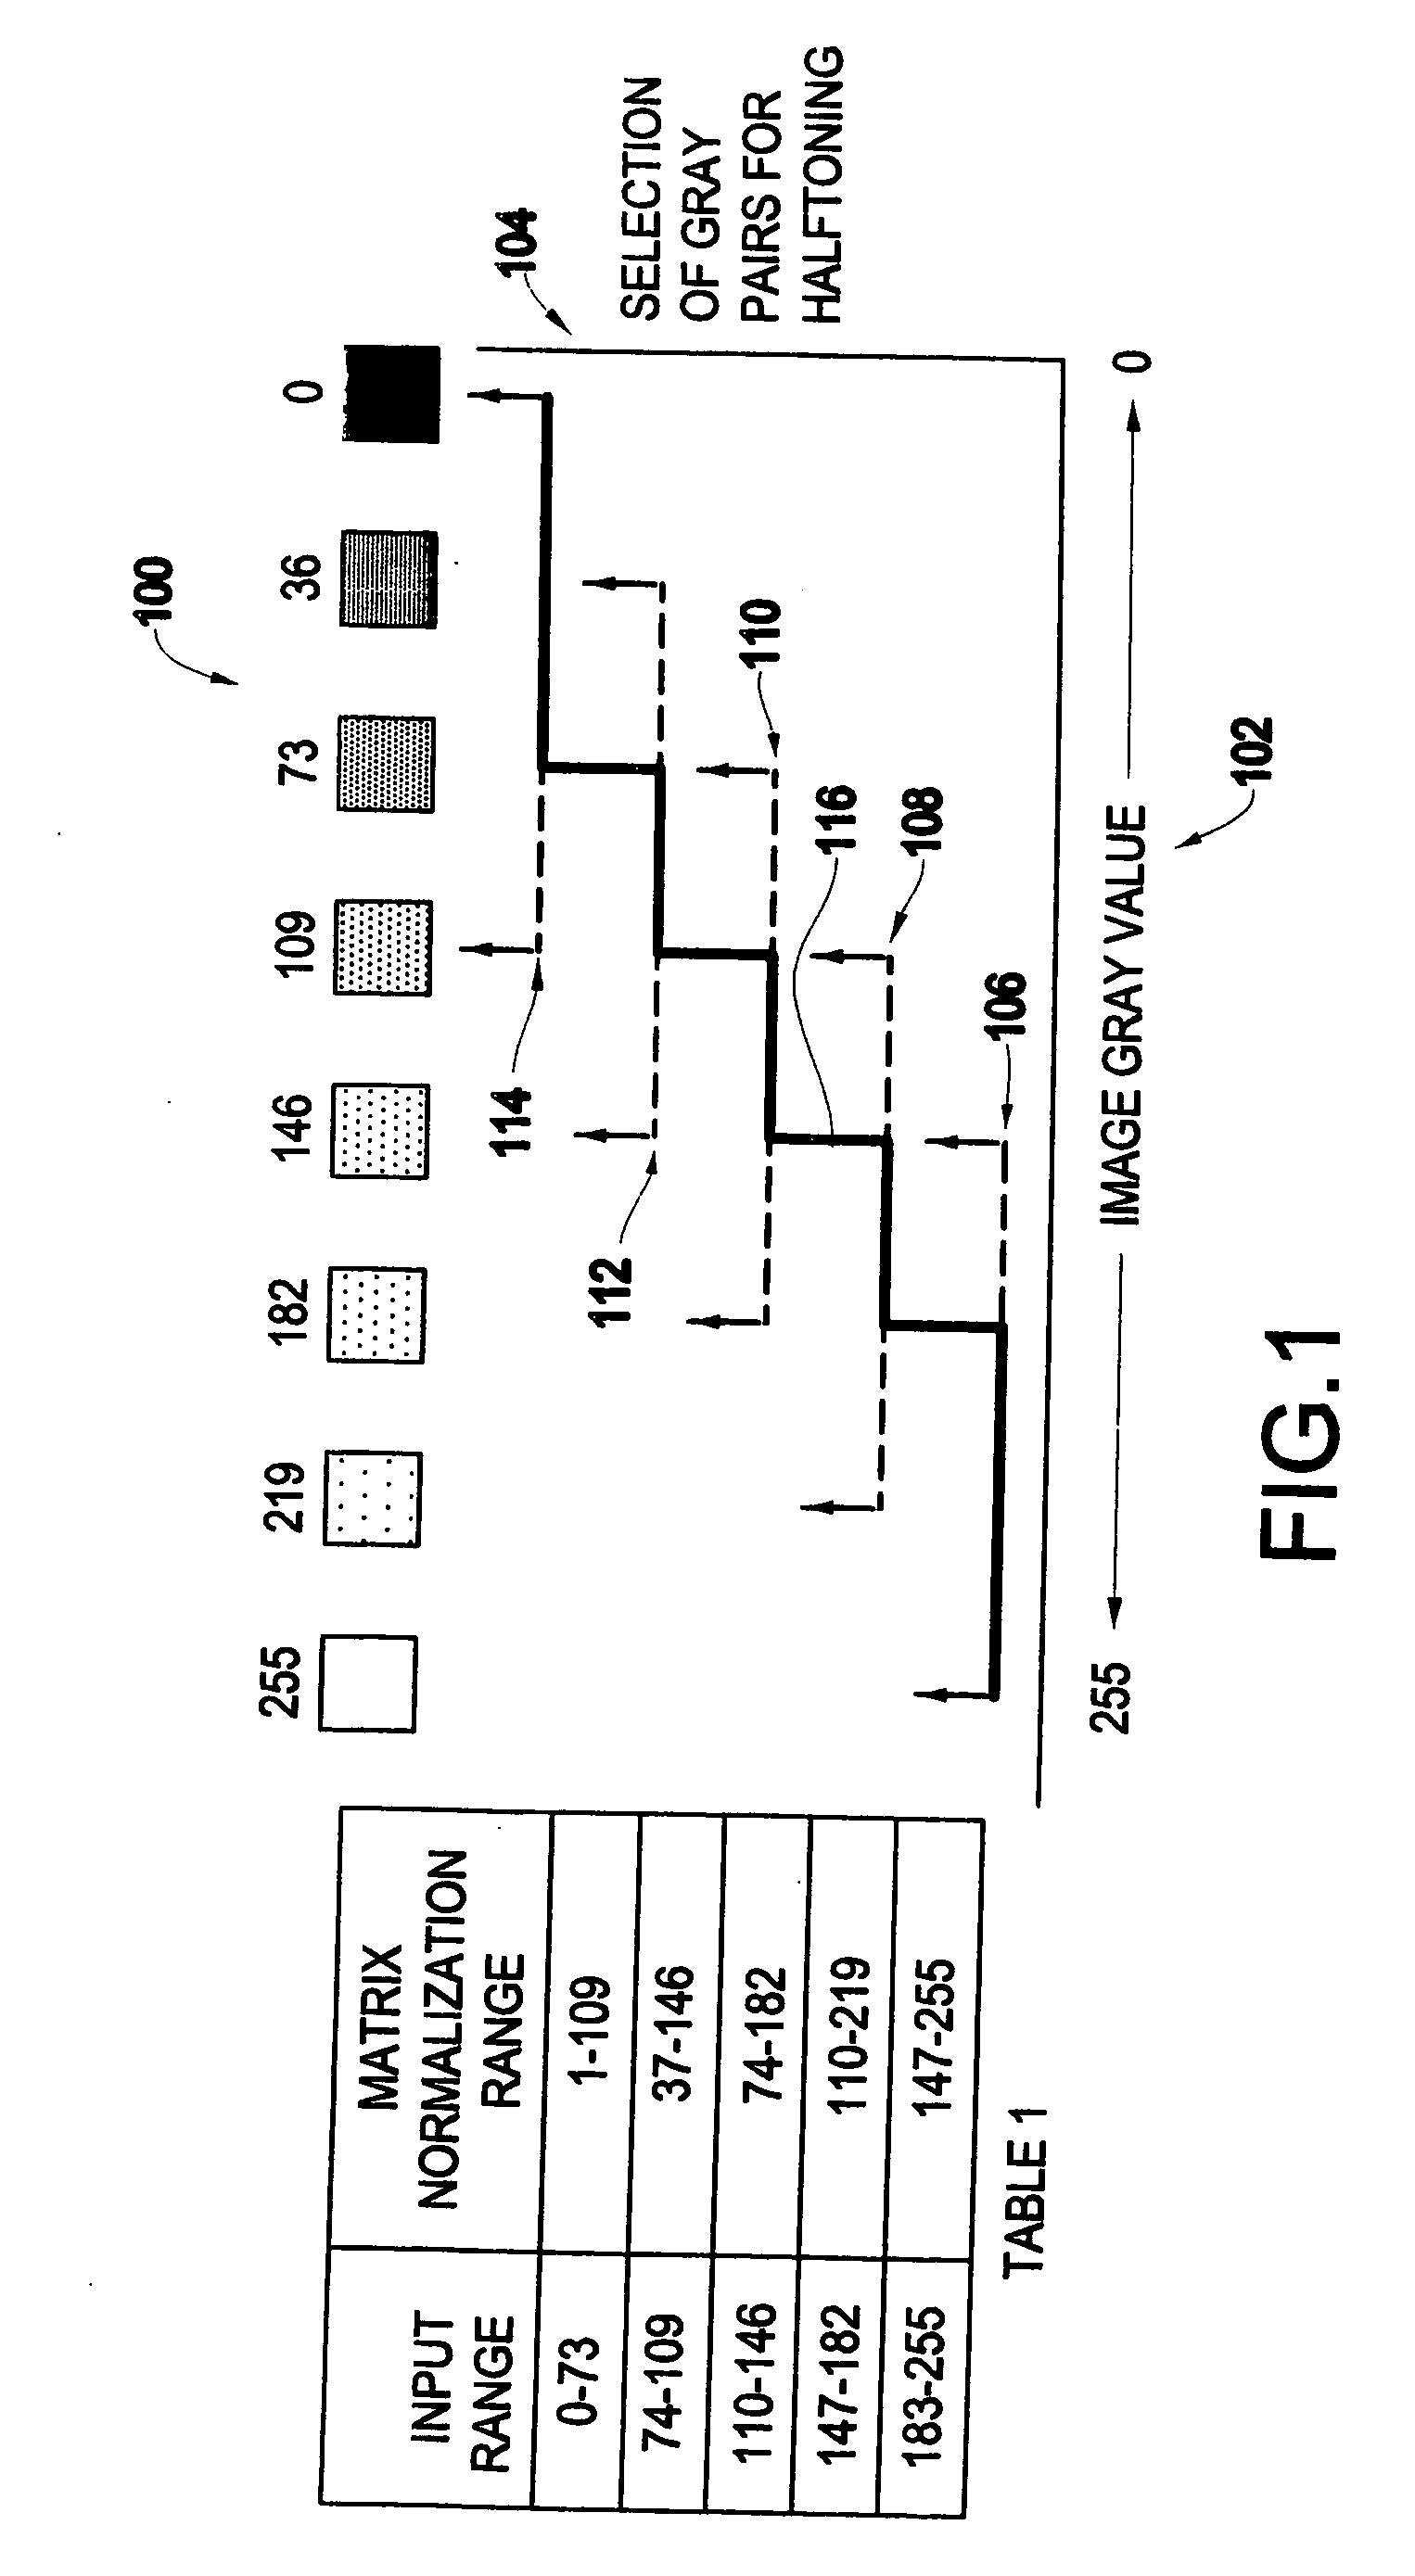 System and method for multi-bit halftoning